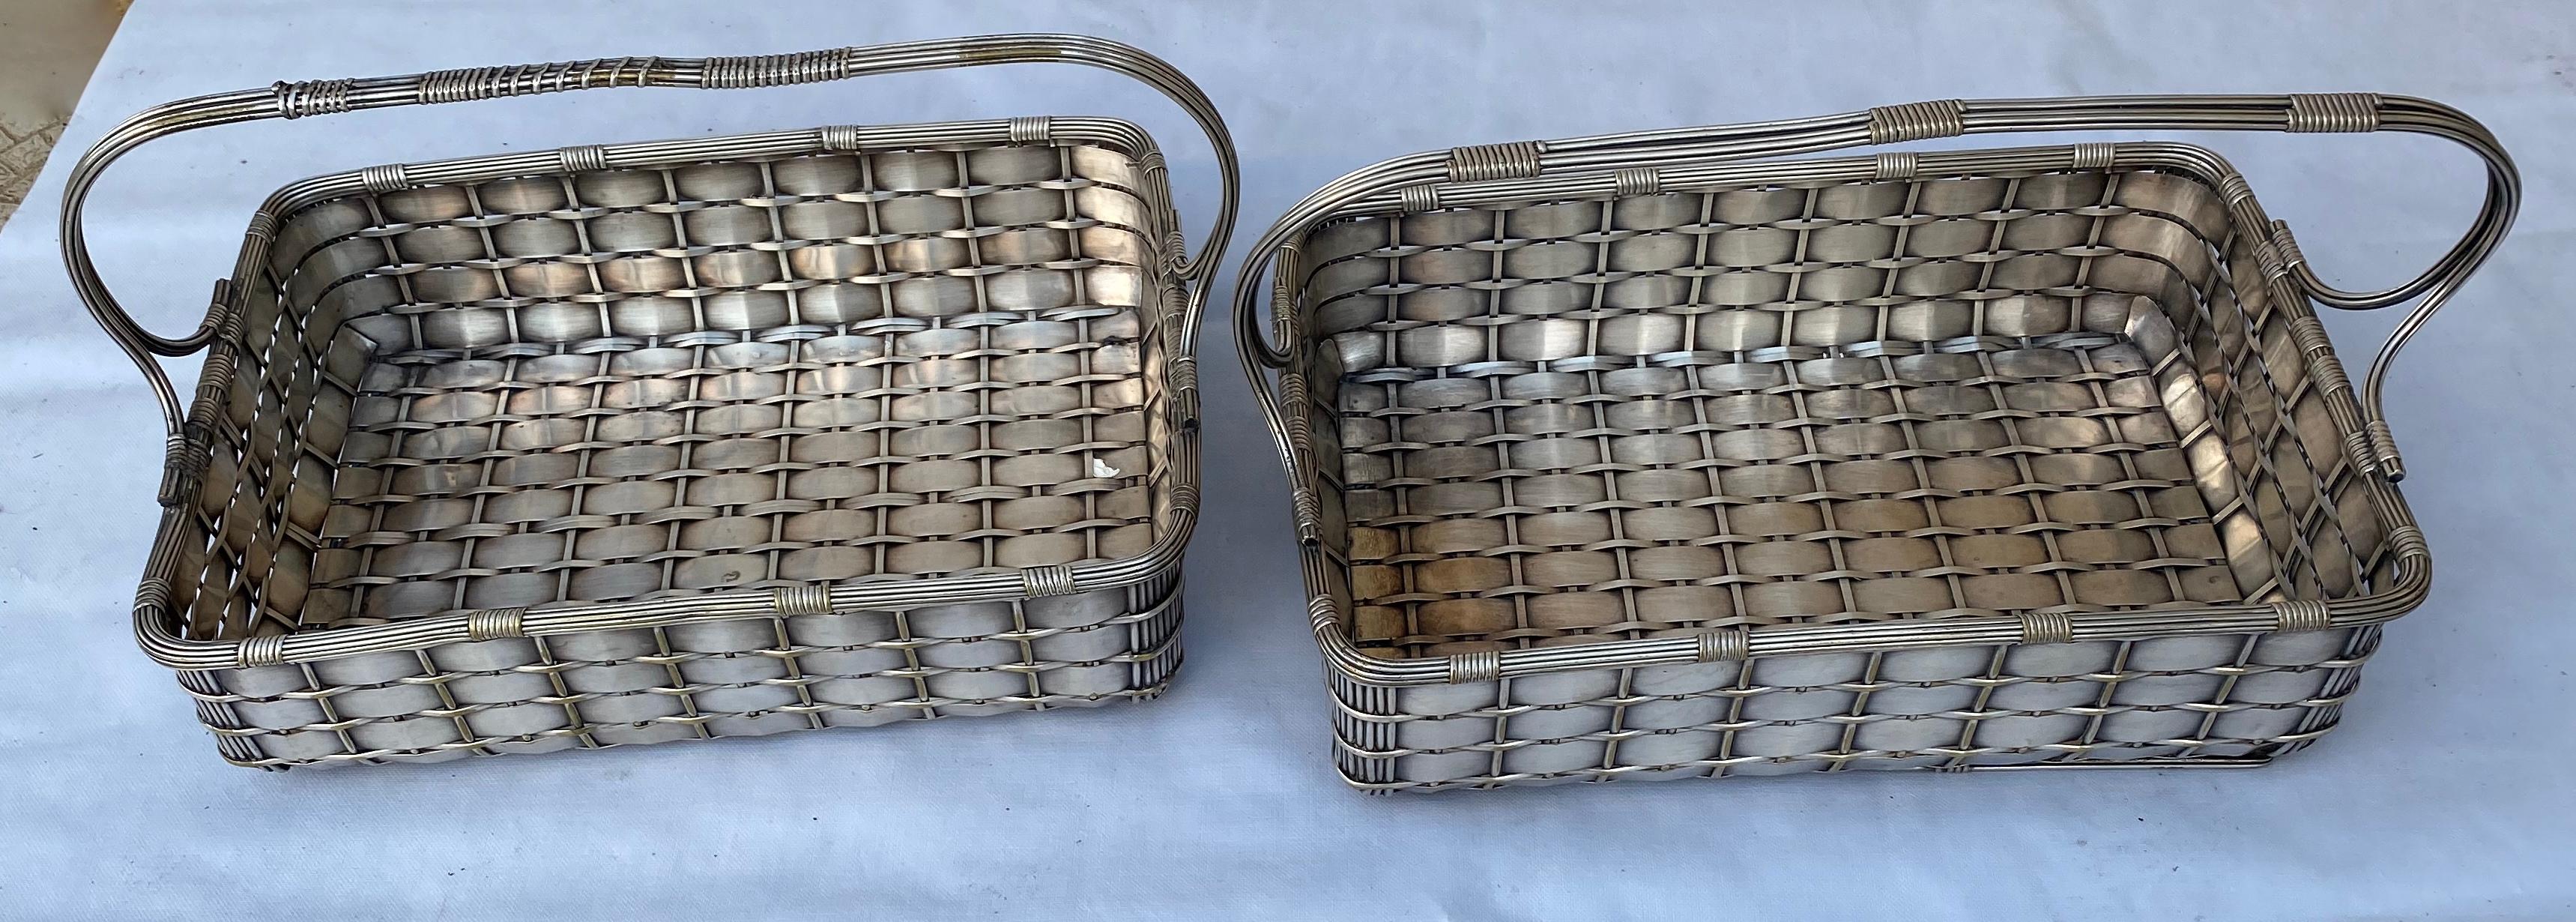 European 1900 ‘Pair of Presentation Baskets in Silvered Metal from Parisian Palace For Sale